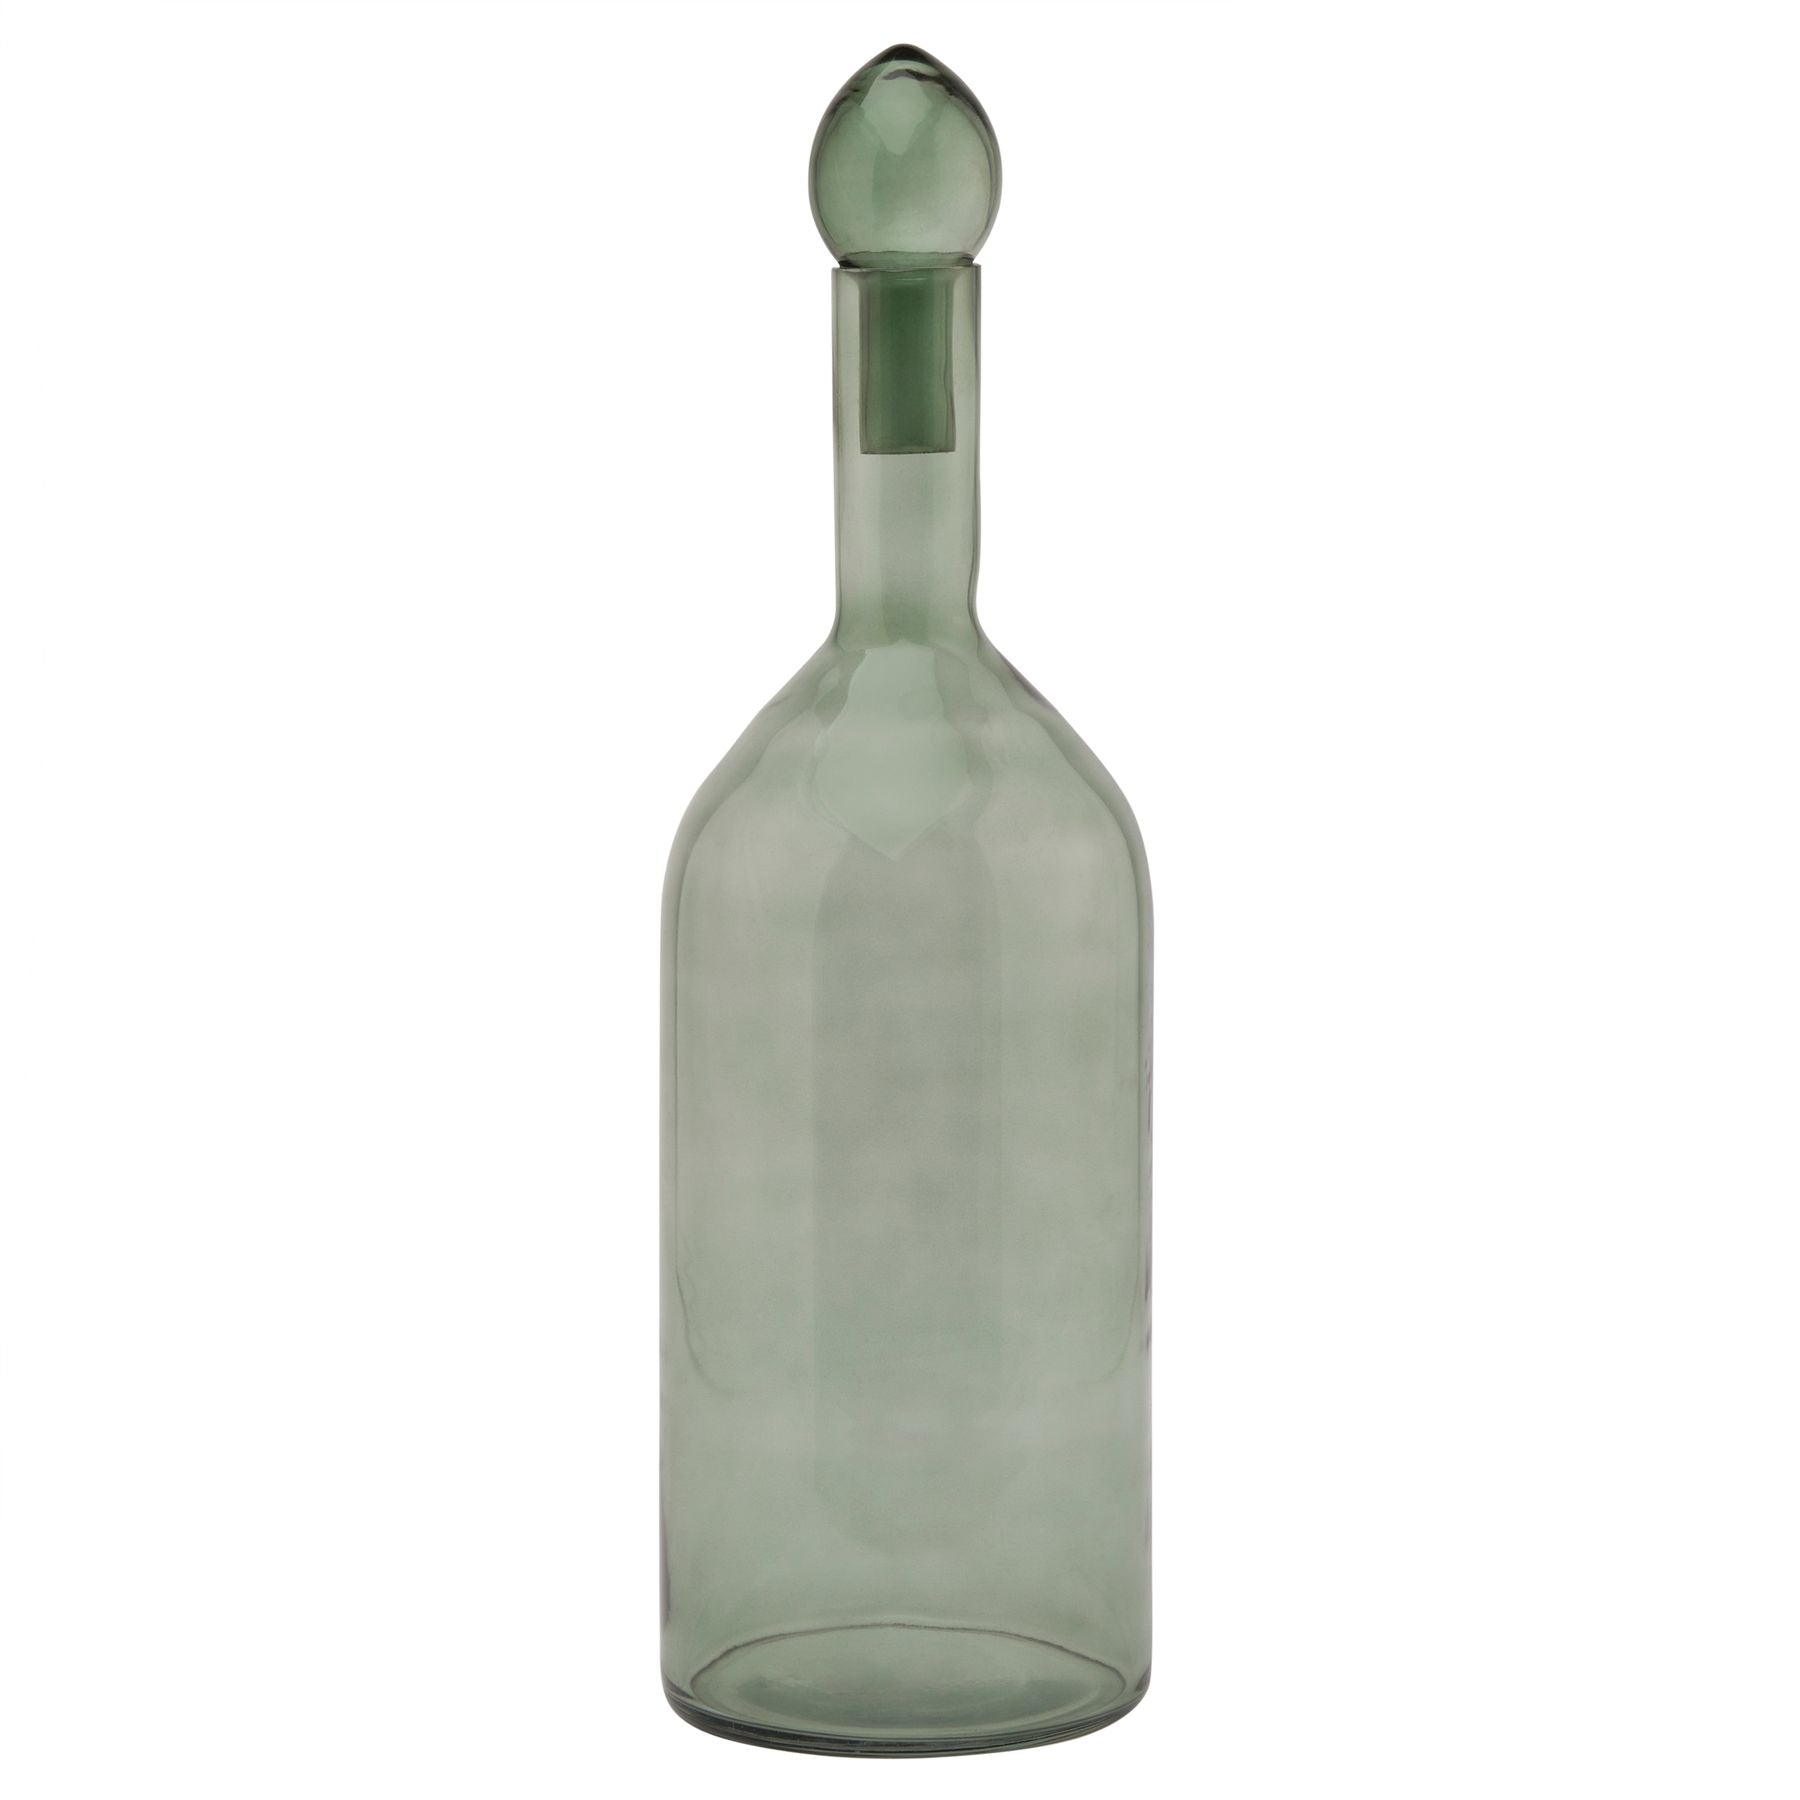 View Smoked Sage Glass Tall Bottle With Stopper information